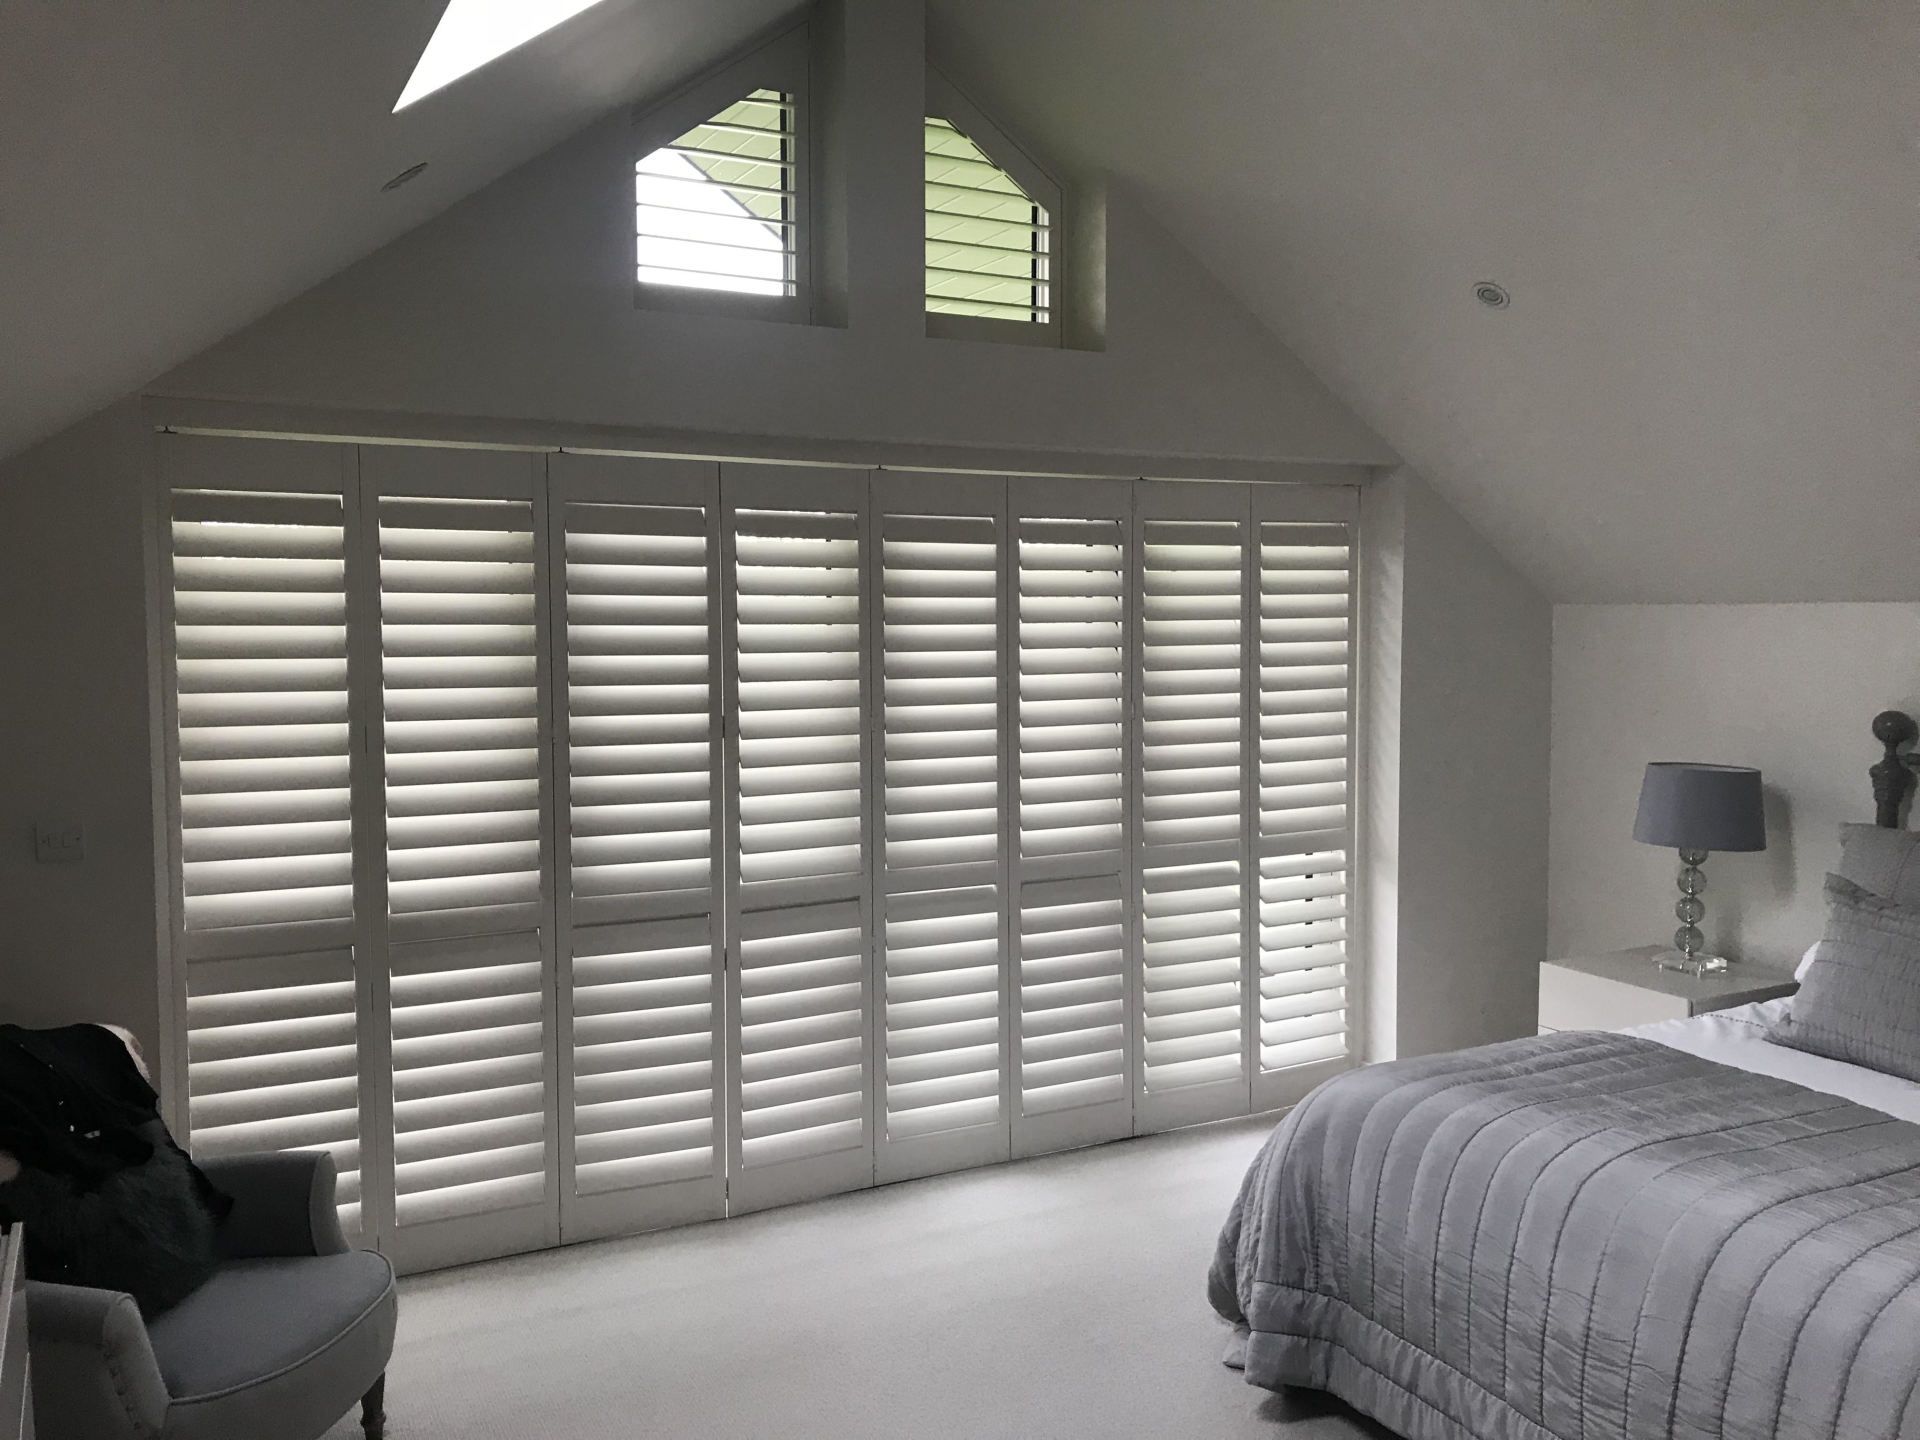 British Made Shutters available to purchase in West Byfleet | Wooden Shutters | Patio Door Shutters |  Made-to-Measure Shutters